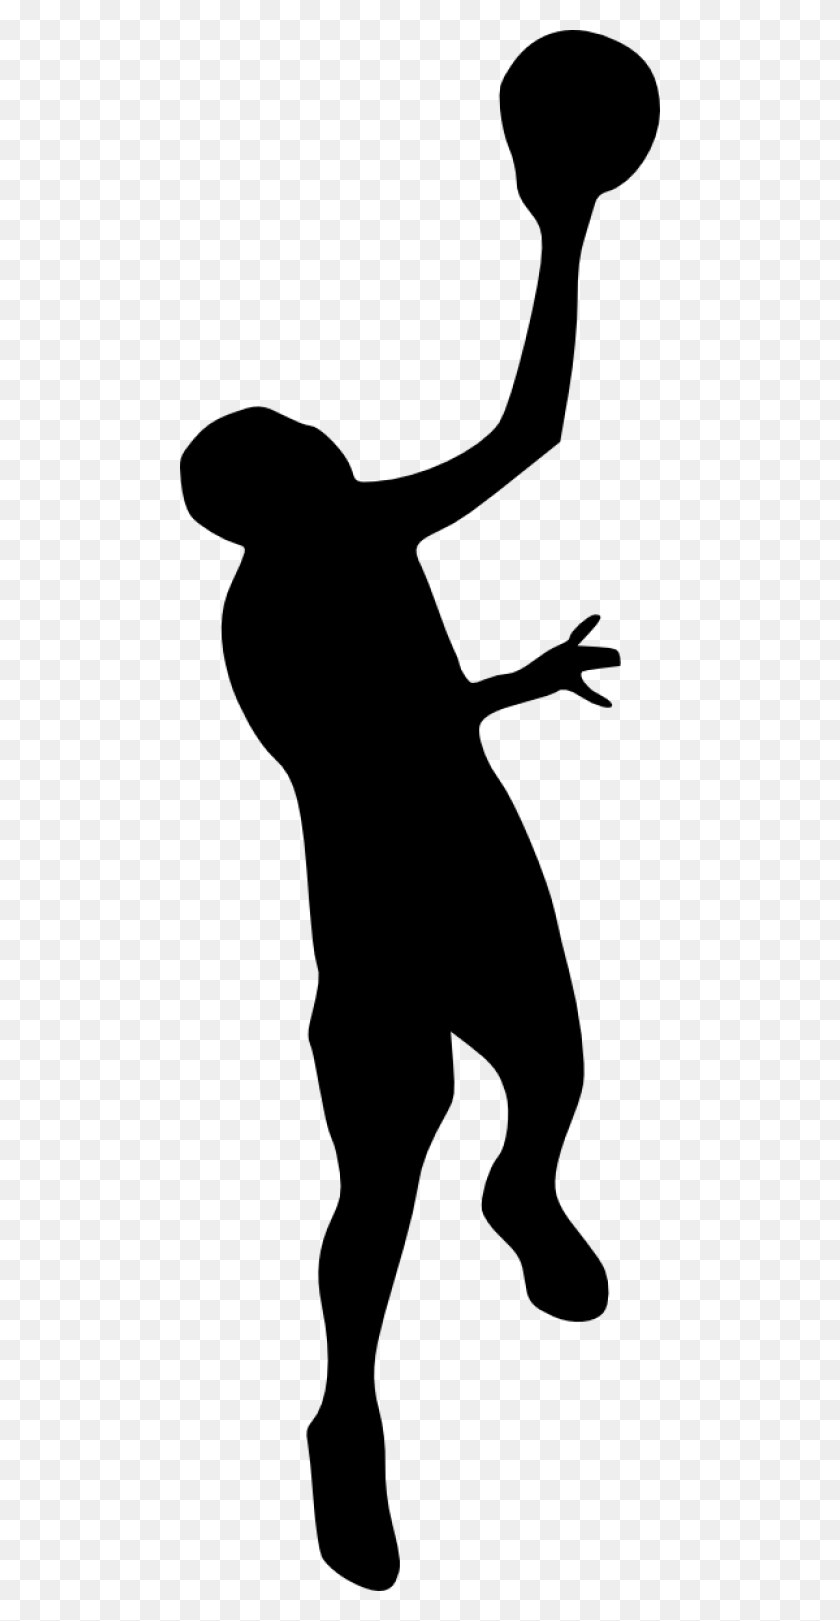 480x1561 Basketball Player Stock Black And White Huge Freebie! Download - Basketball On Fire Clipart